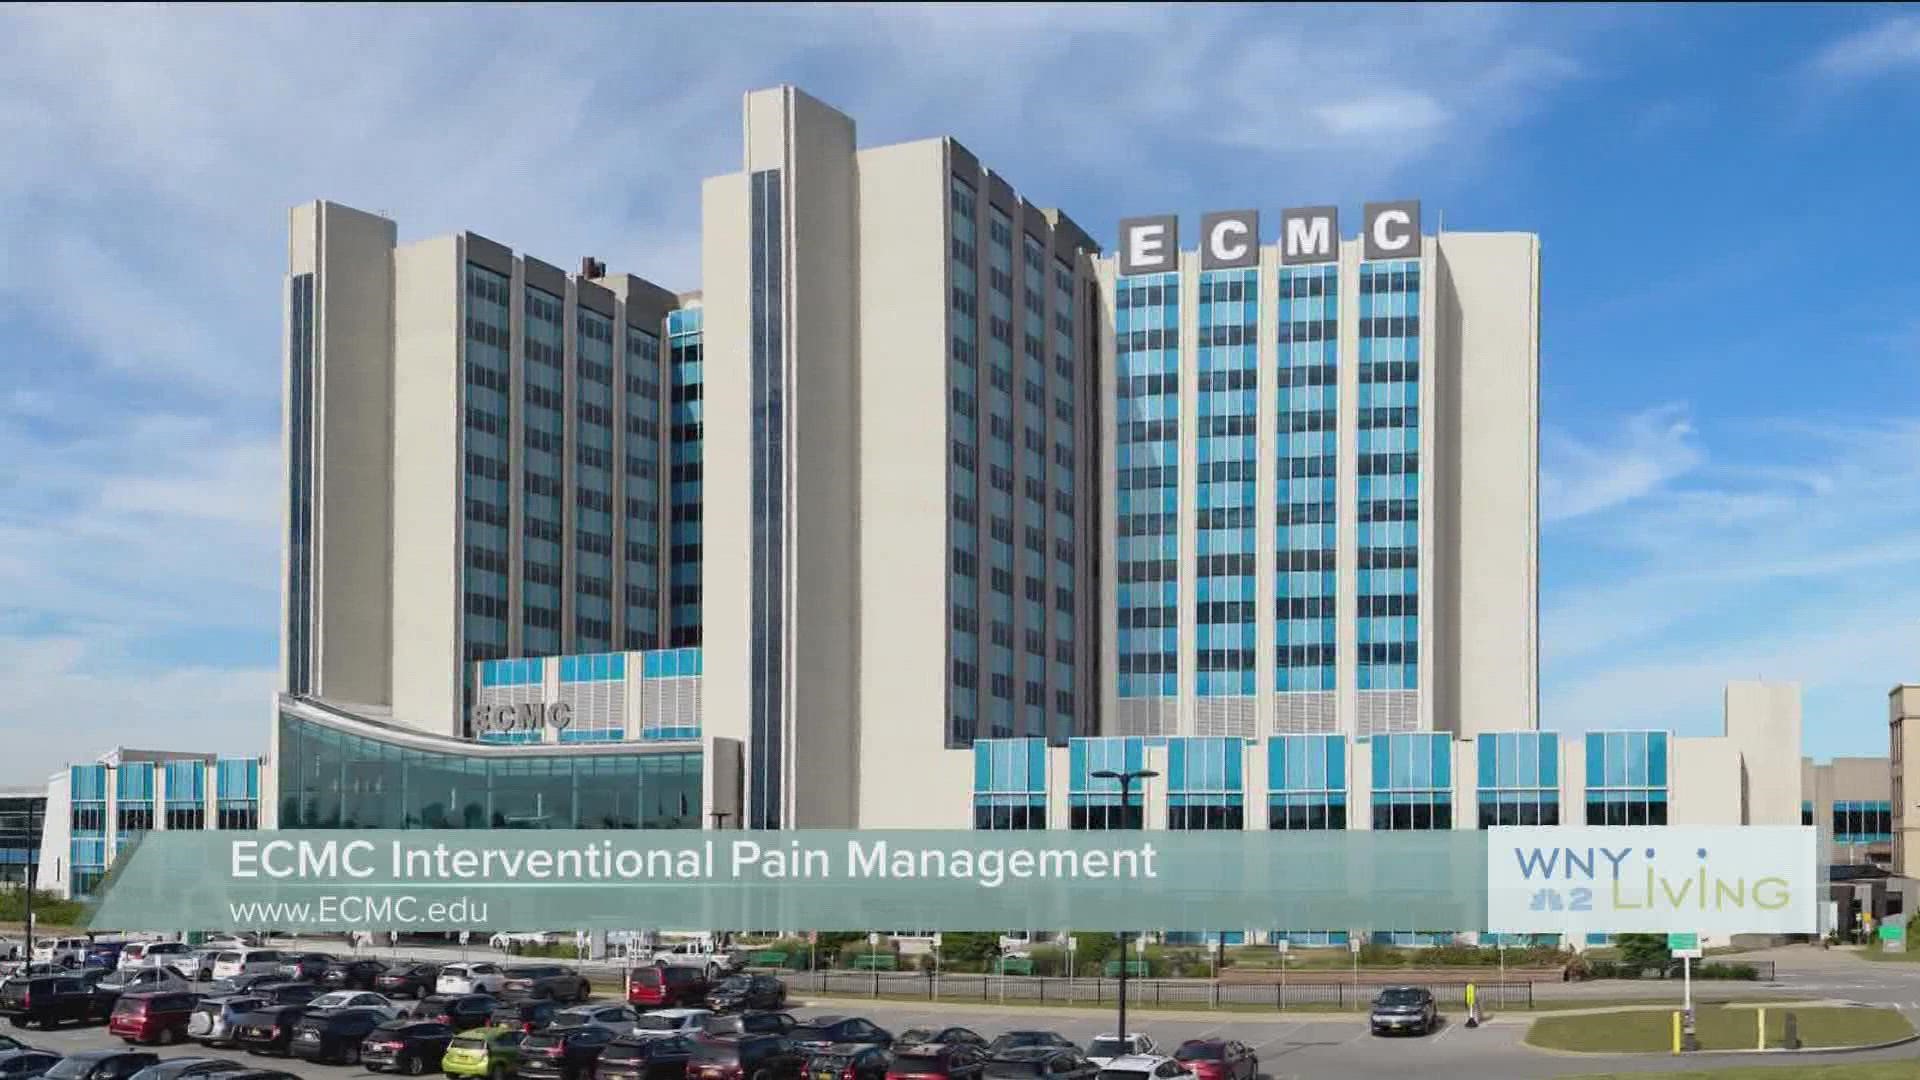 WNY Living - November 19 - ECMC Interventional Pain Management (THIS VIDEO IS SPONSORED BY ECMC INTERVENTIONAL PAIN MANAGEMENT)